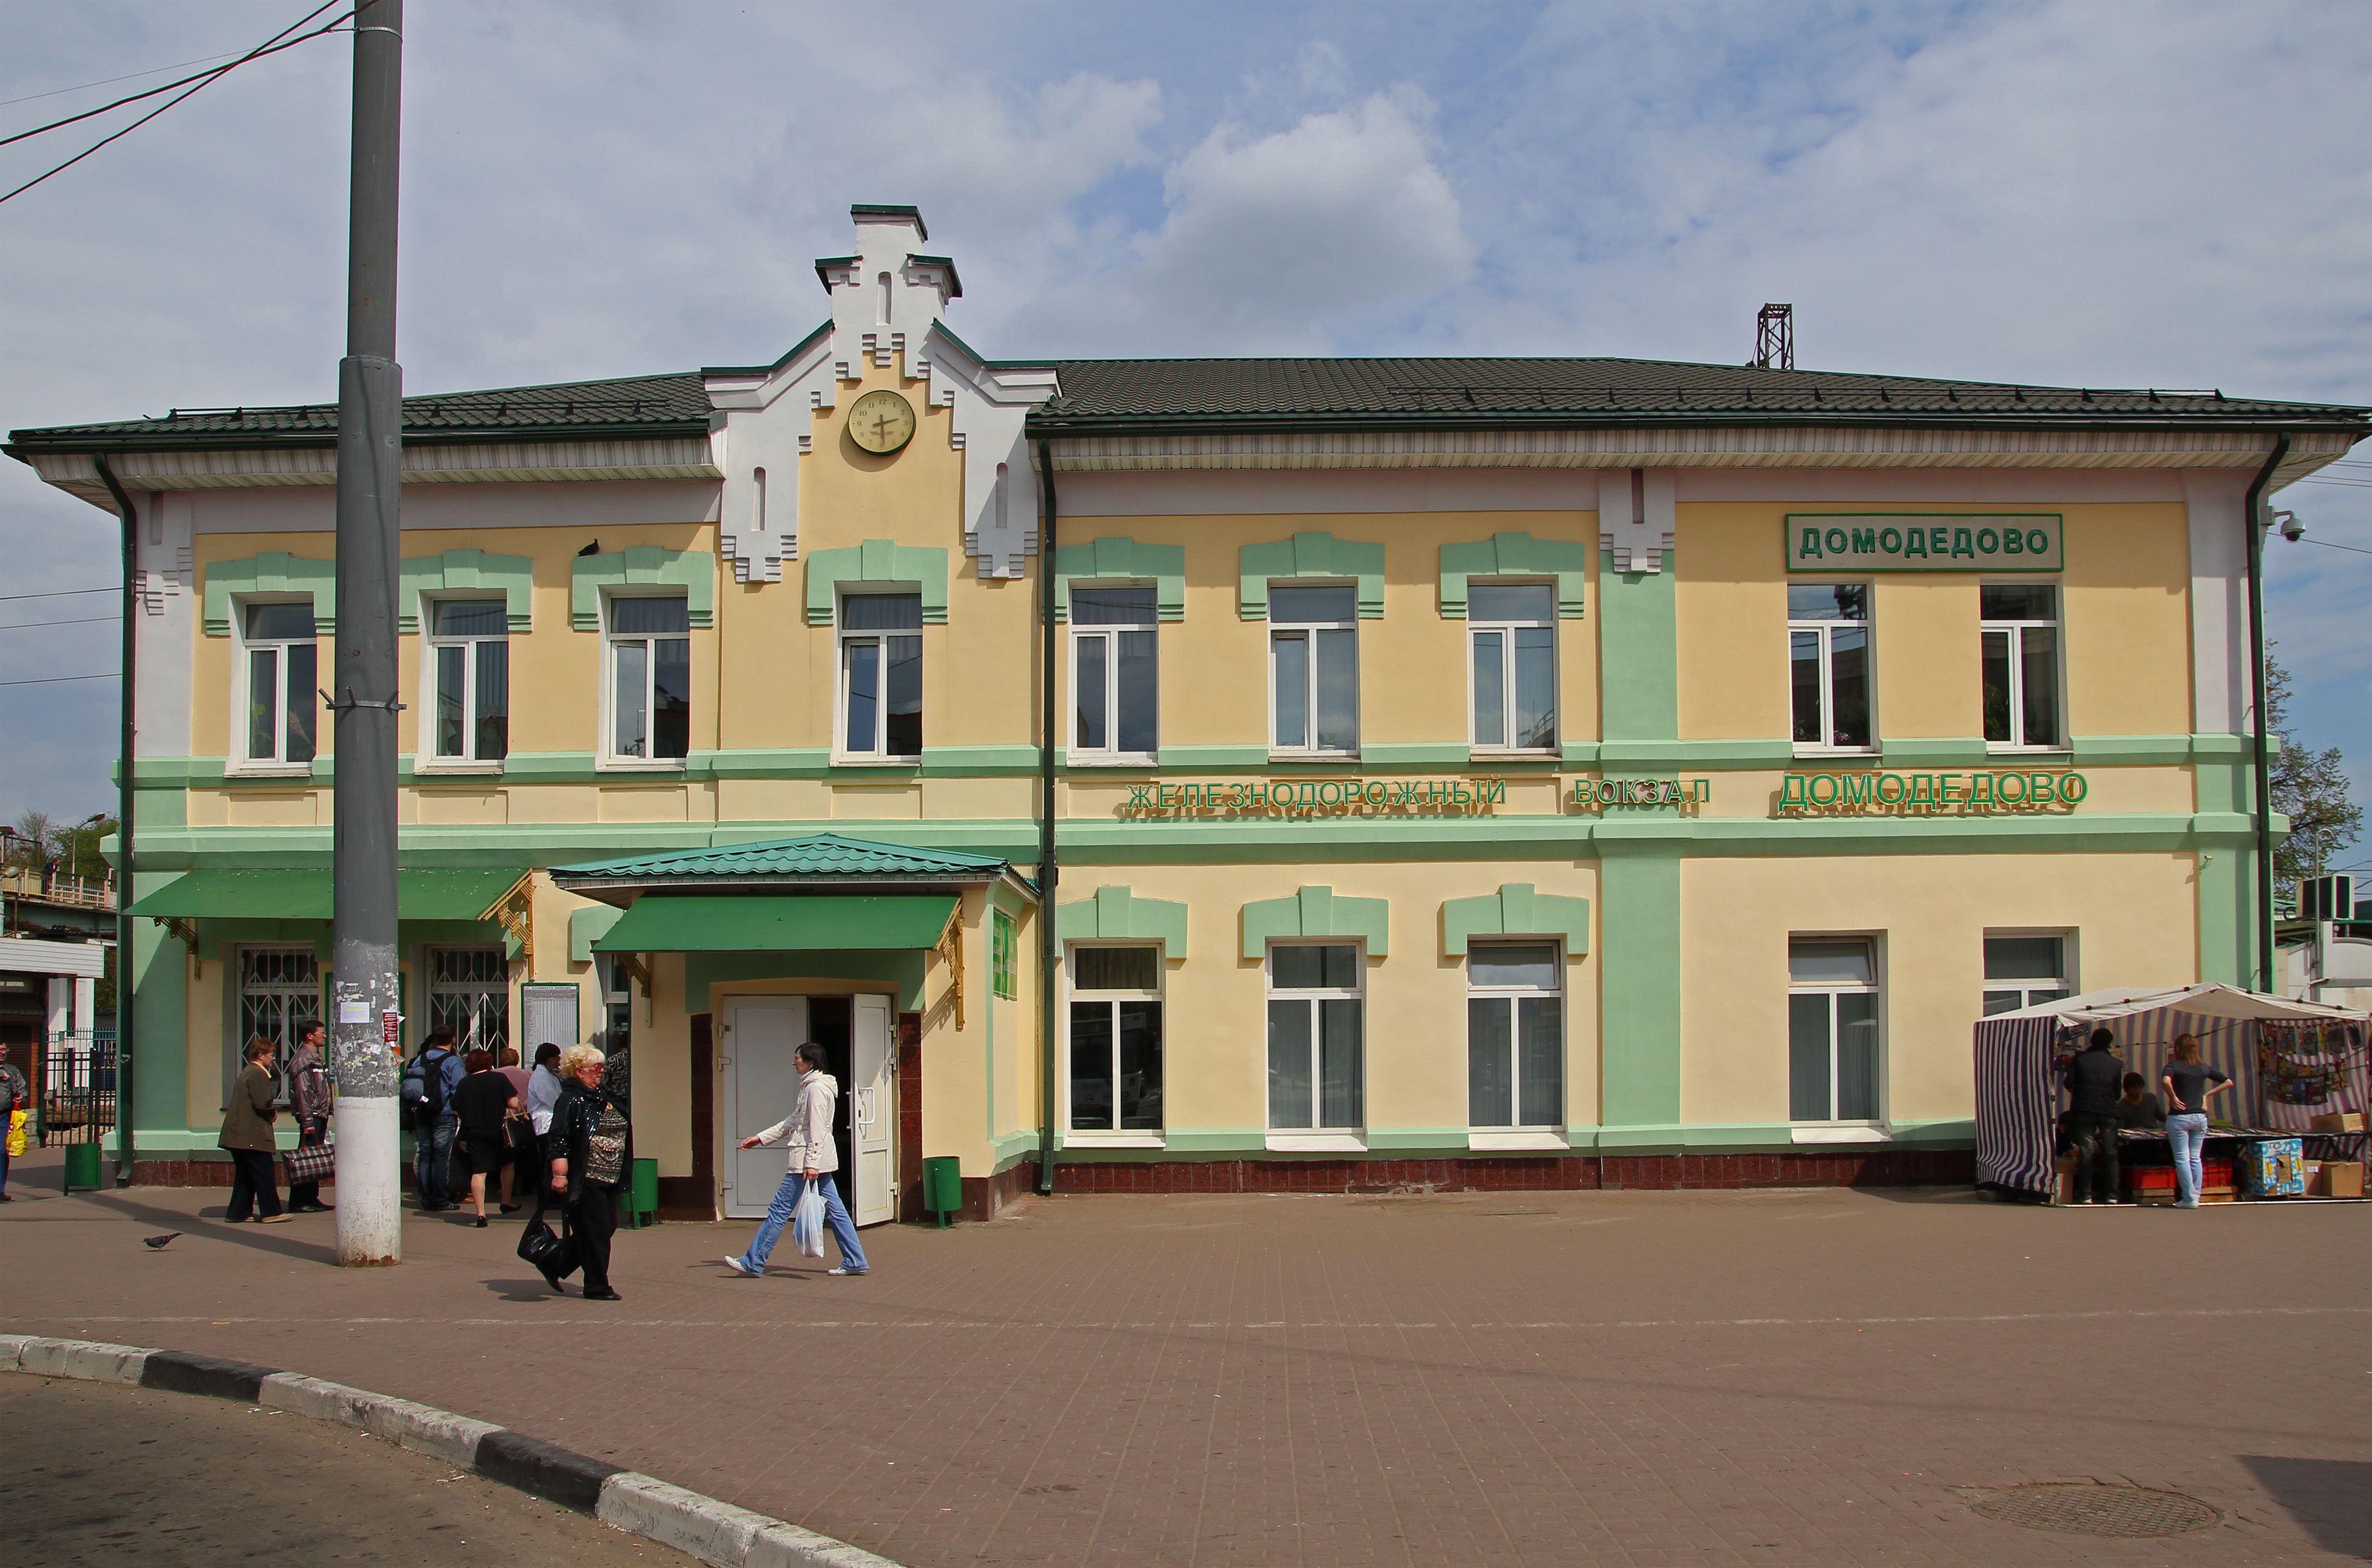 http://dic.academic.ru/pictures/wiki/files/68/Domodedovo_rail_station_03.jpg